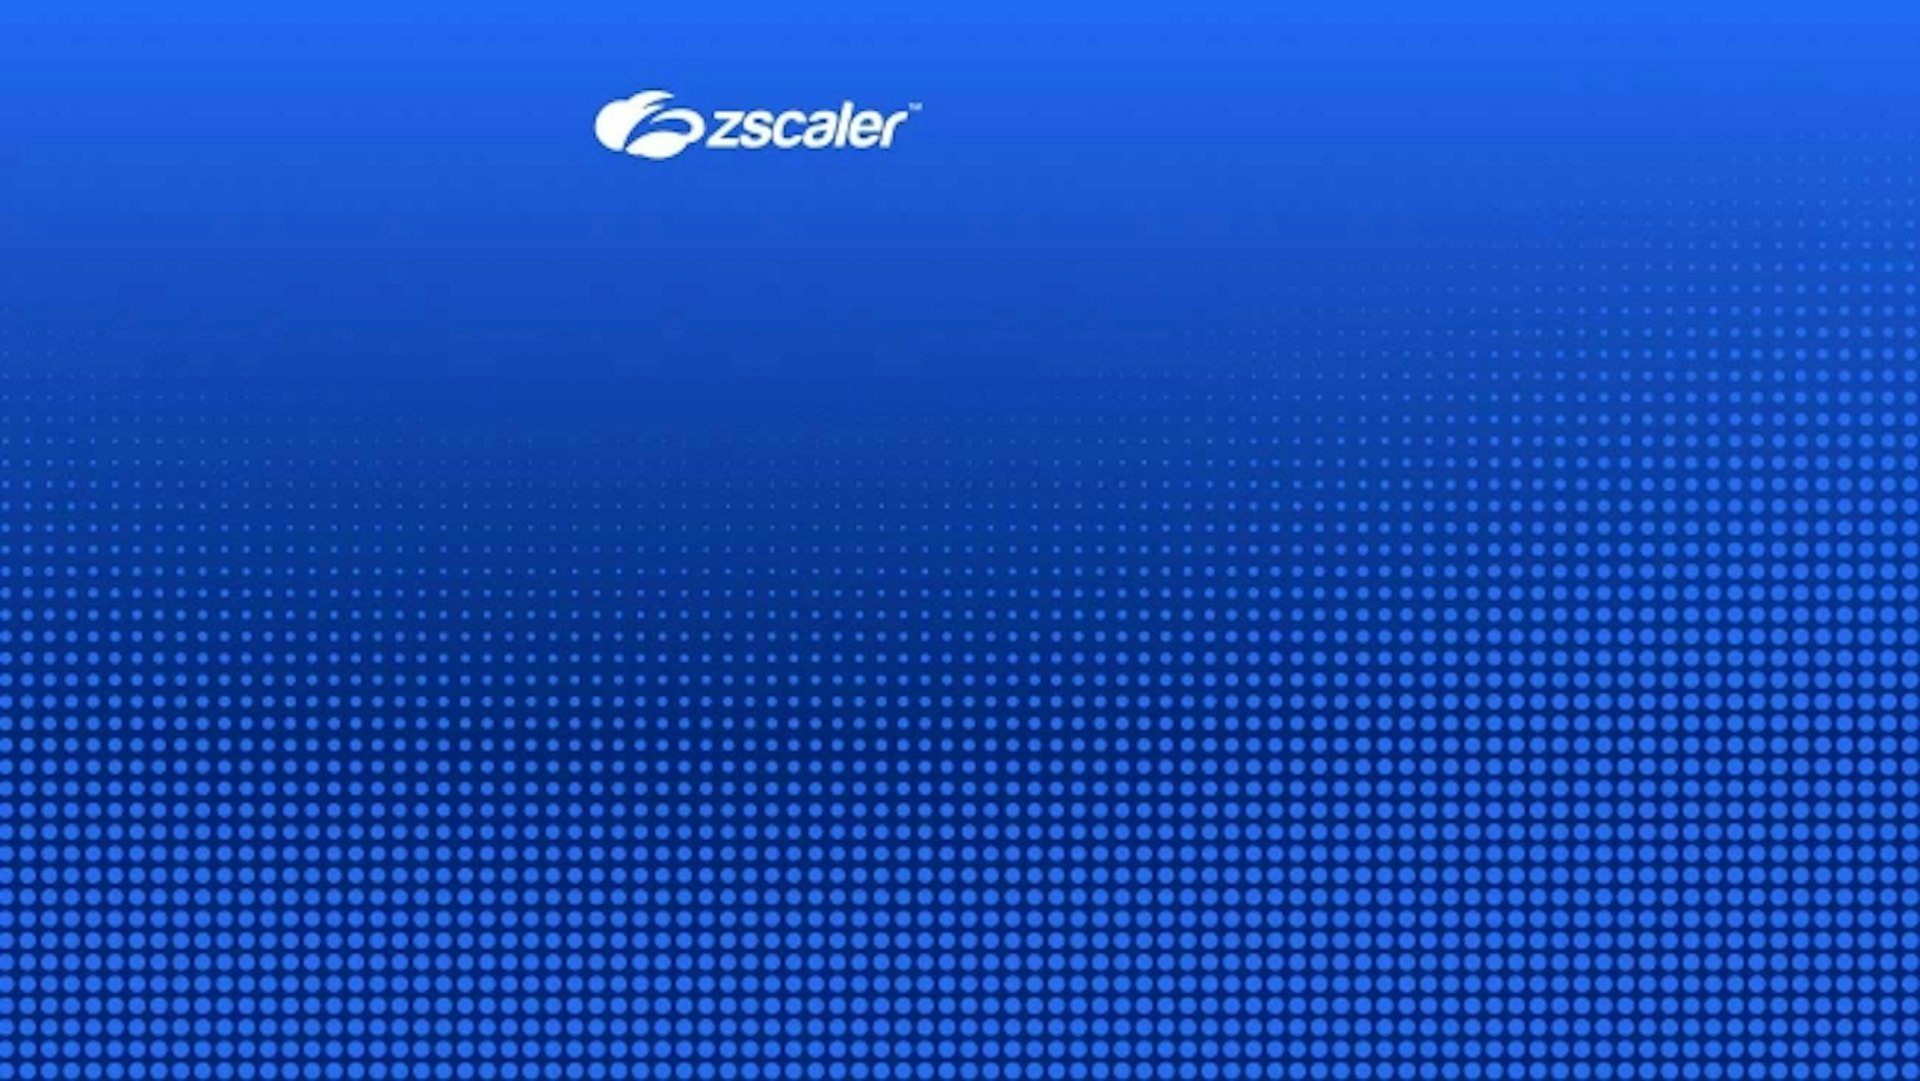 Zscaler Partners with Imprivata to Deliver Zero Trust for Healthcare Organizations